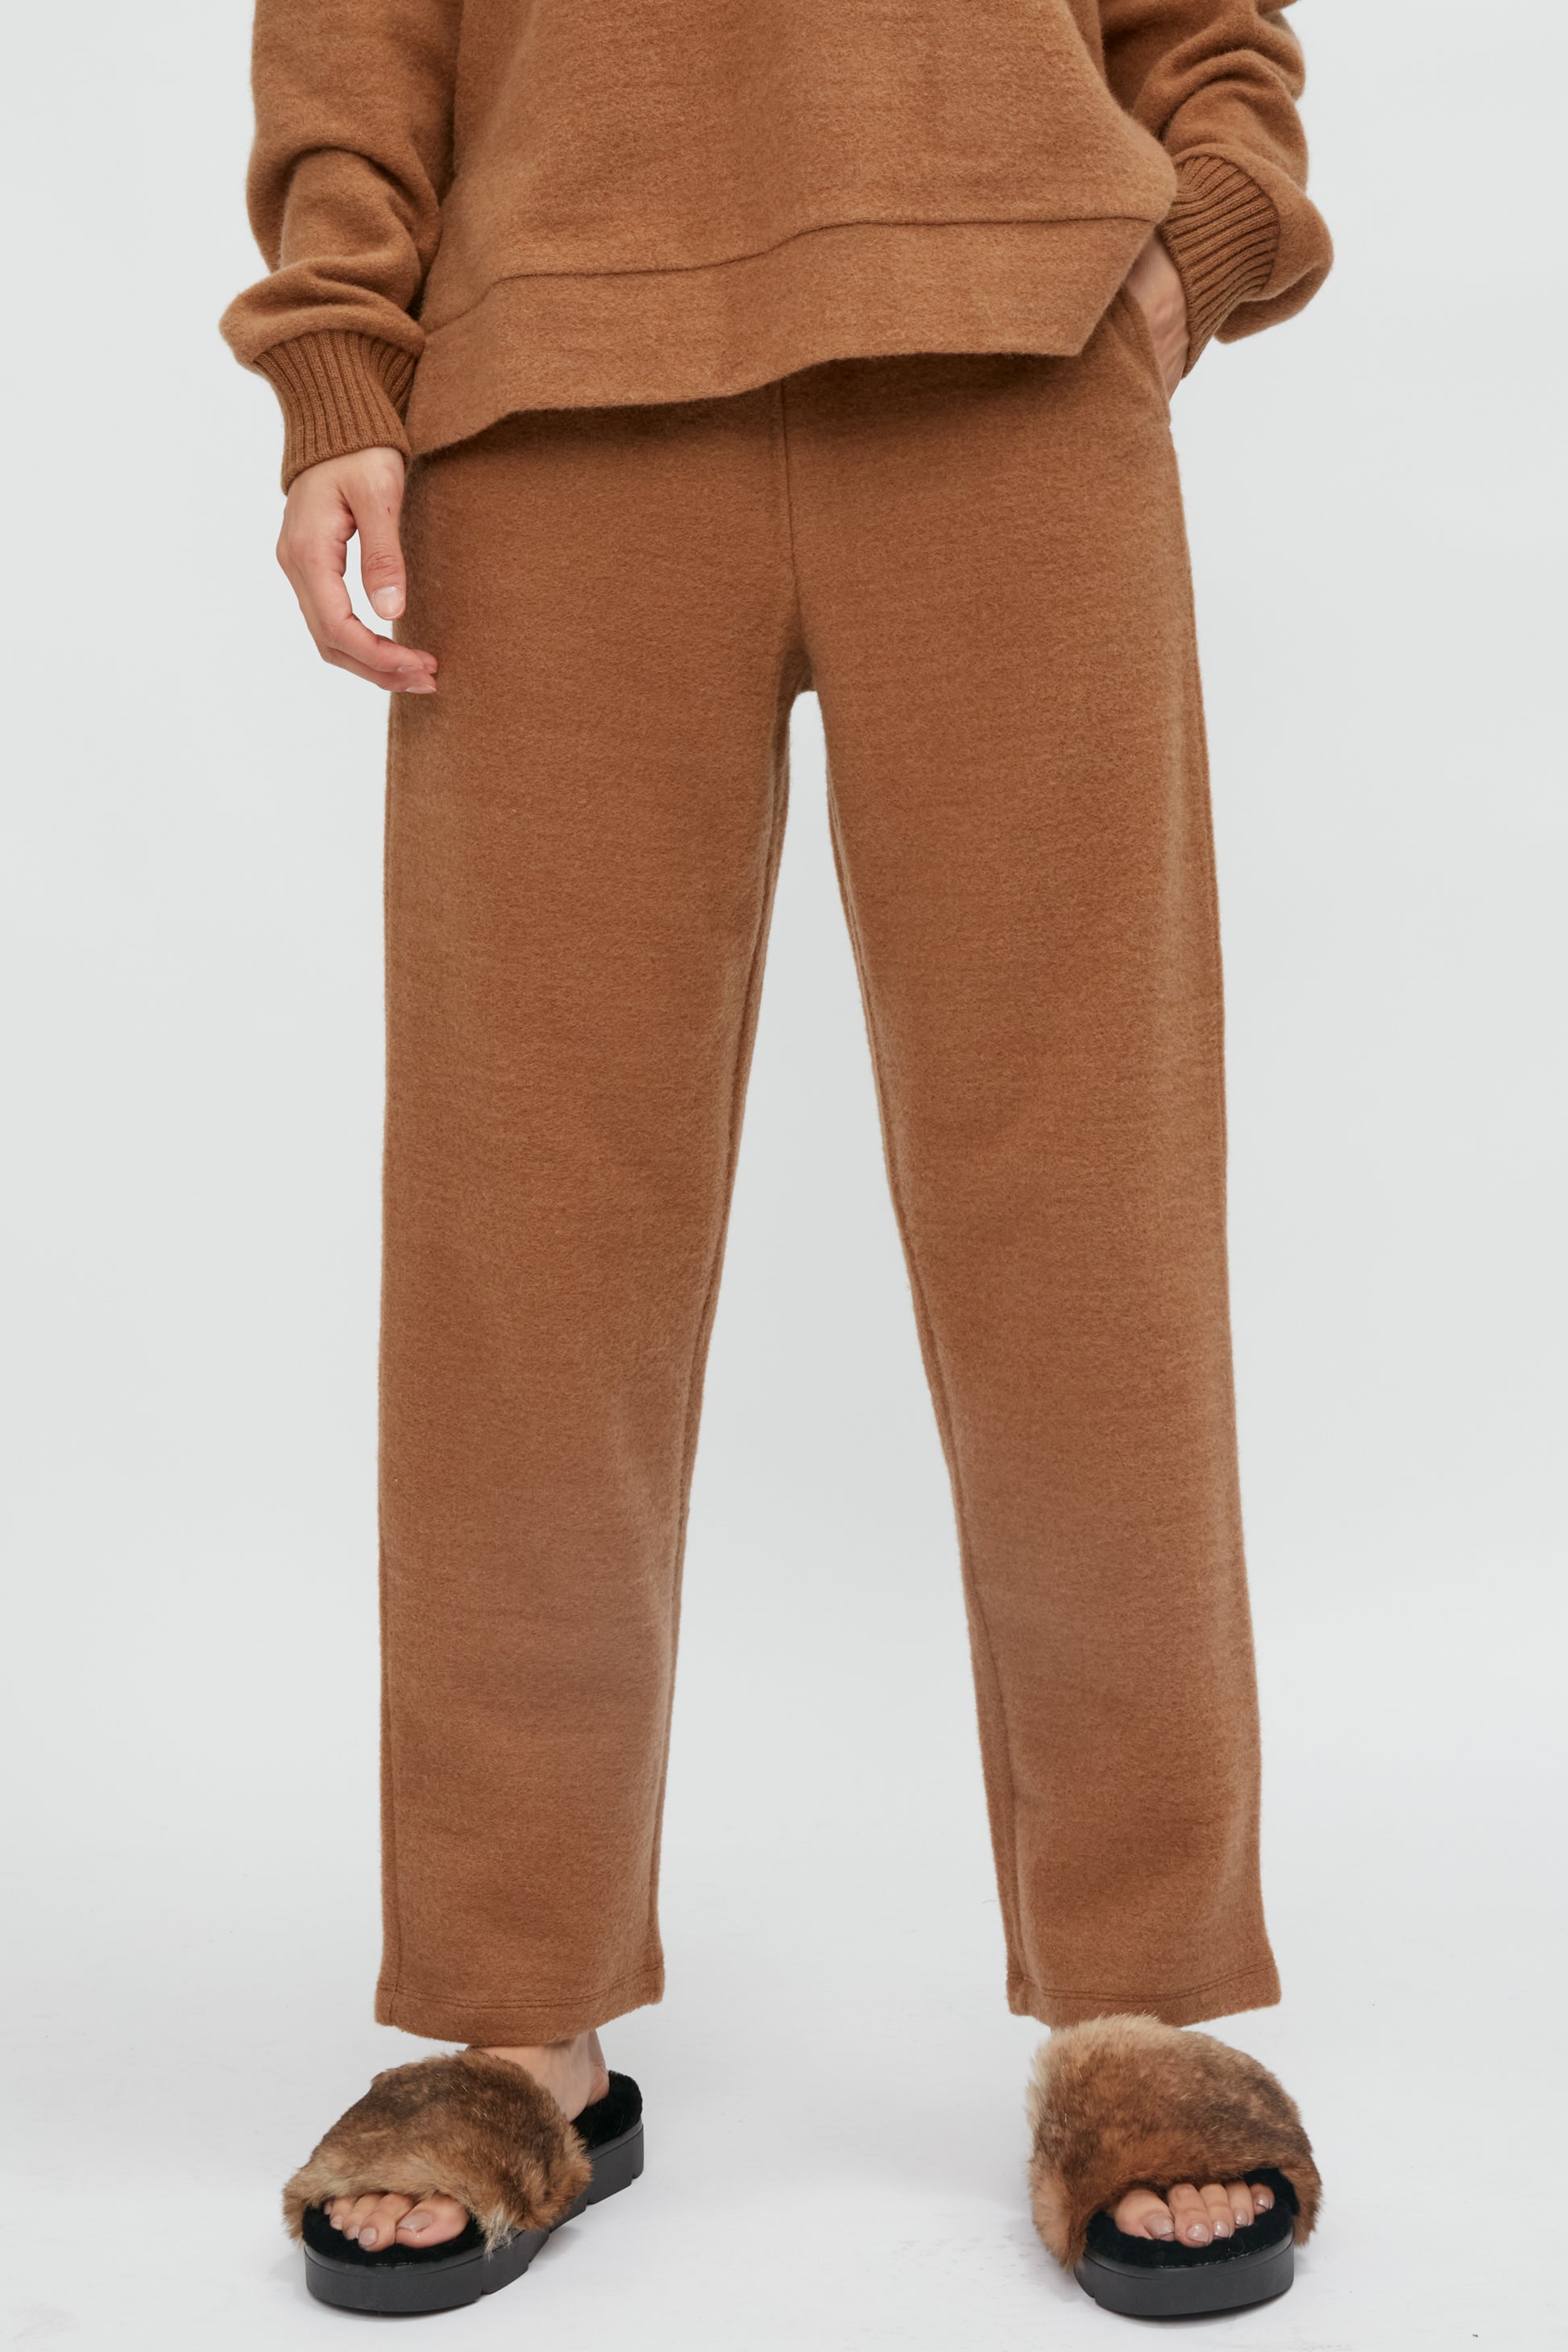 MAX MARA LEISURE Beira Jersey Trouser Pant in Camel